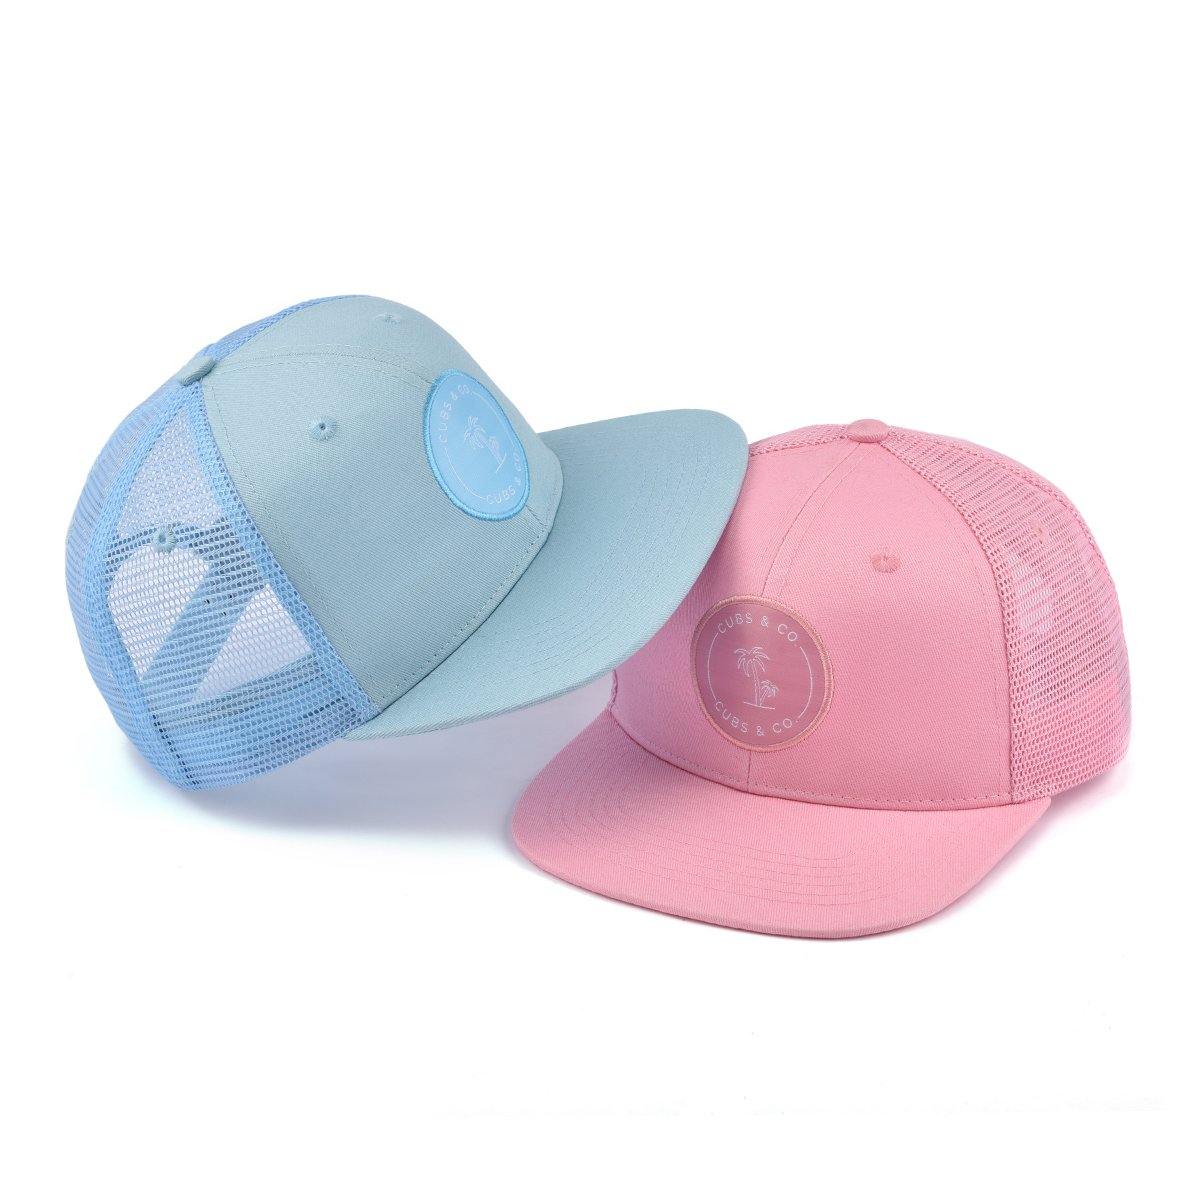 Matching blue and pink trucker hat for babies, toddlers, kids, men and women. Cubs & Co. Australia